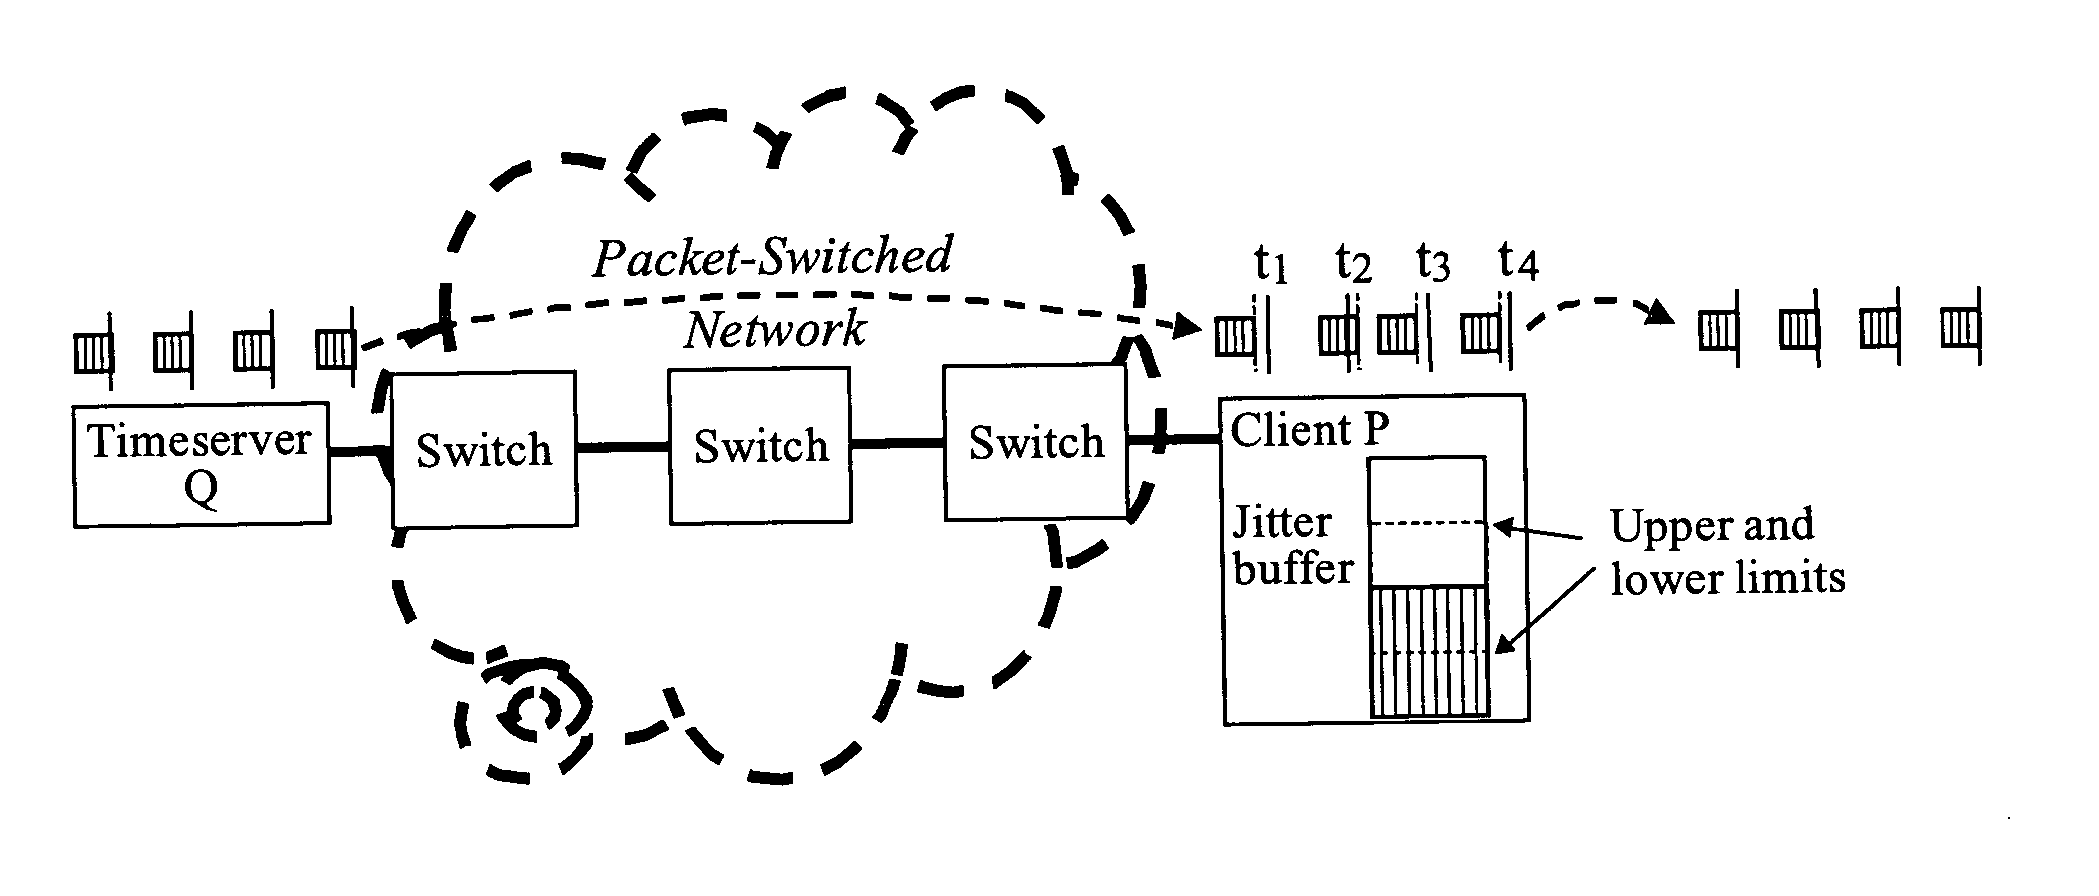 Remote synchronization in packet-switched networks